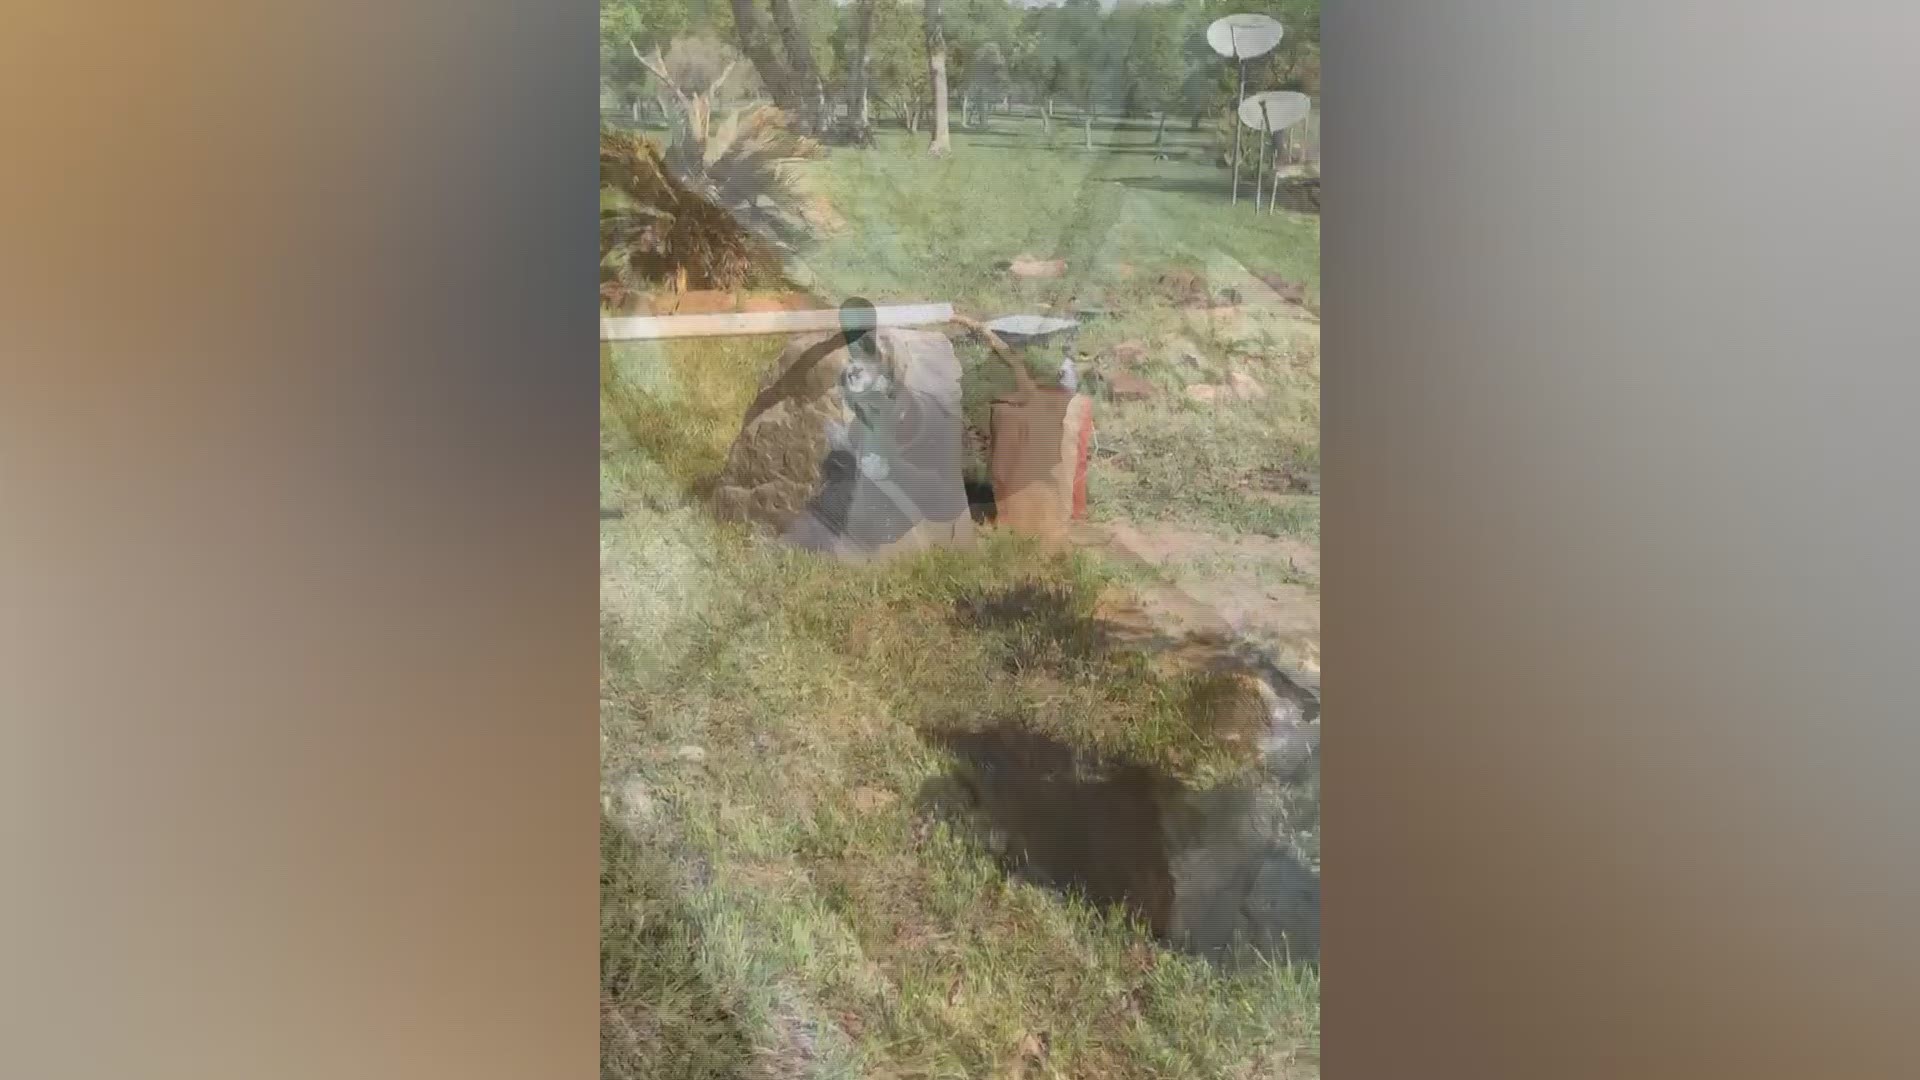 Brown water comes out of homeowner's water well due to pipeline construction nearby.